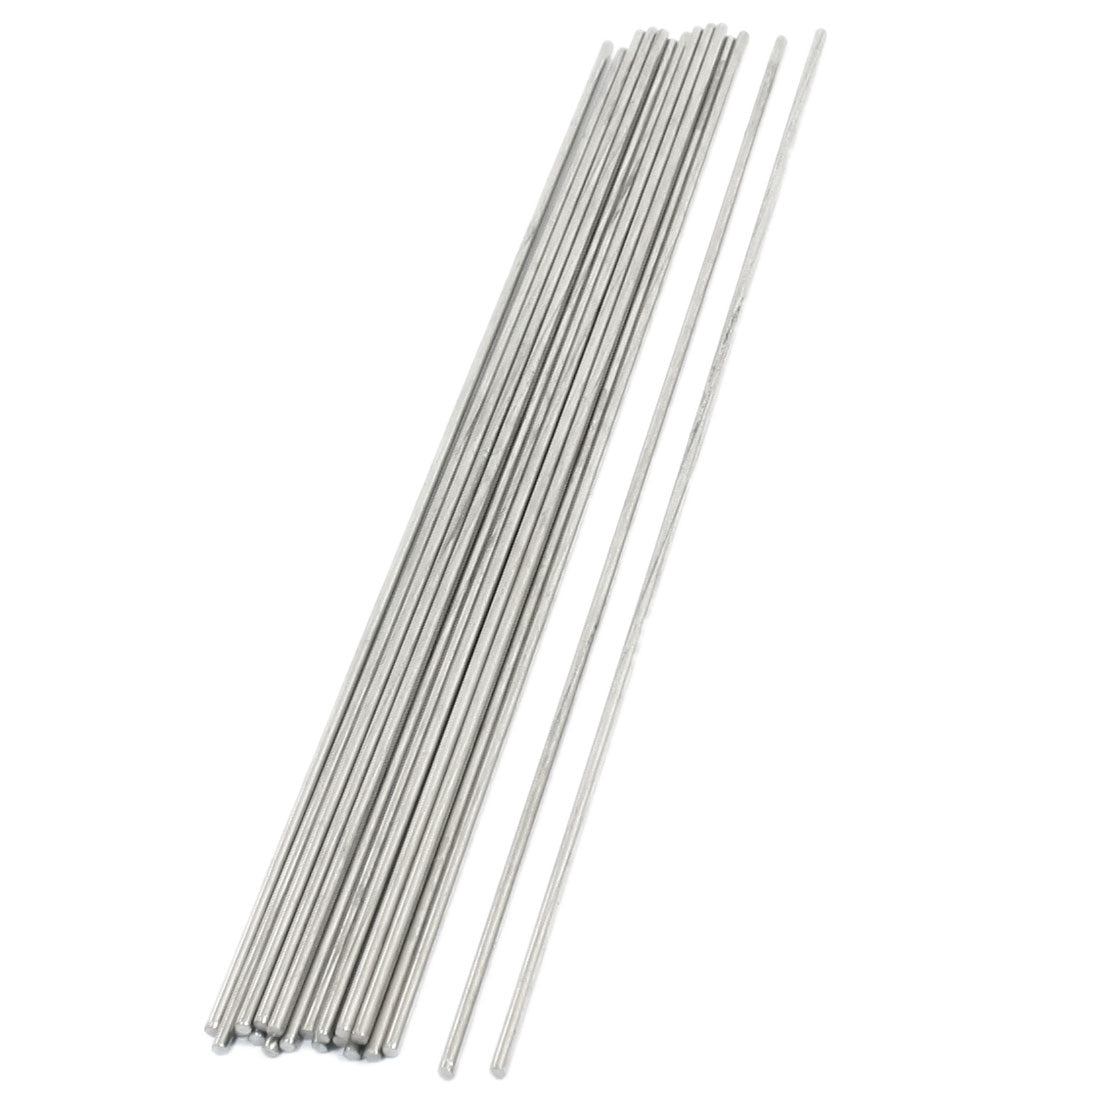 uxcell Uxcell 20PCS RC Aircraft Parts Stainless Steel Straight Bar Shaft 250mm x 2.5mm